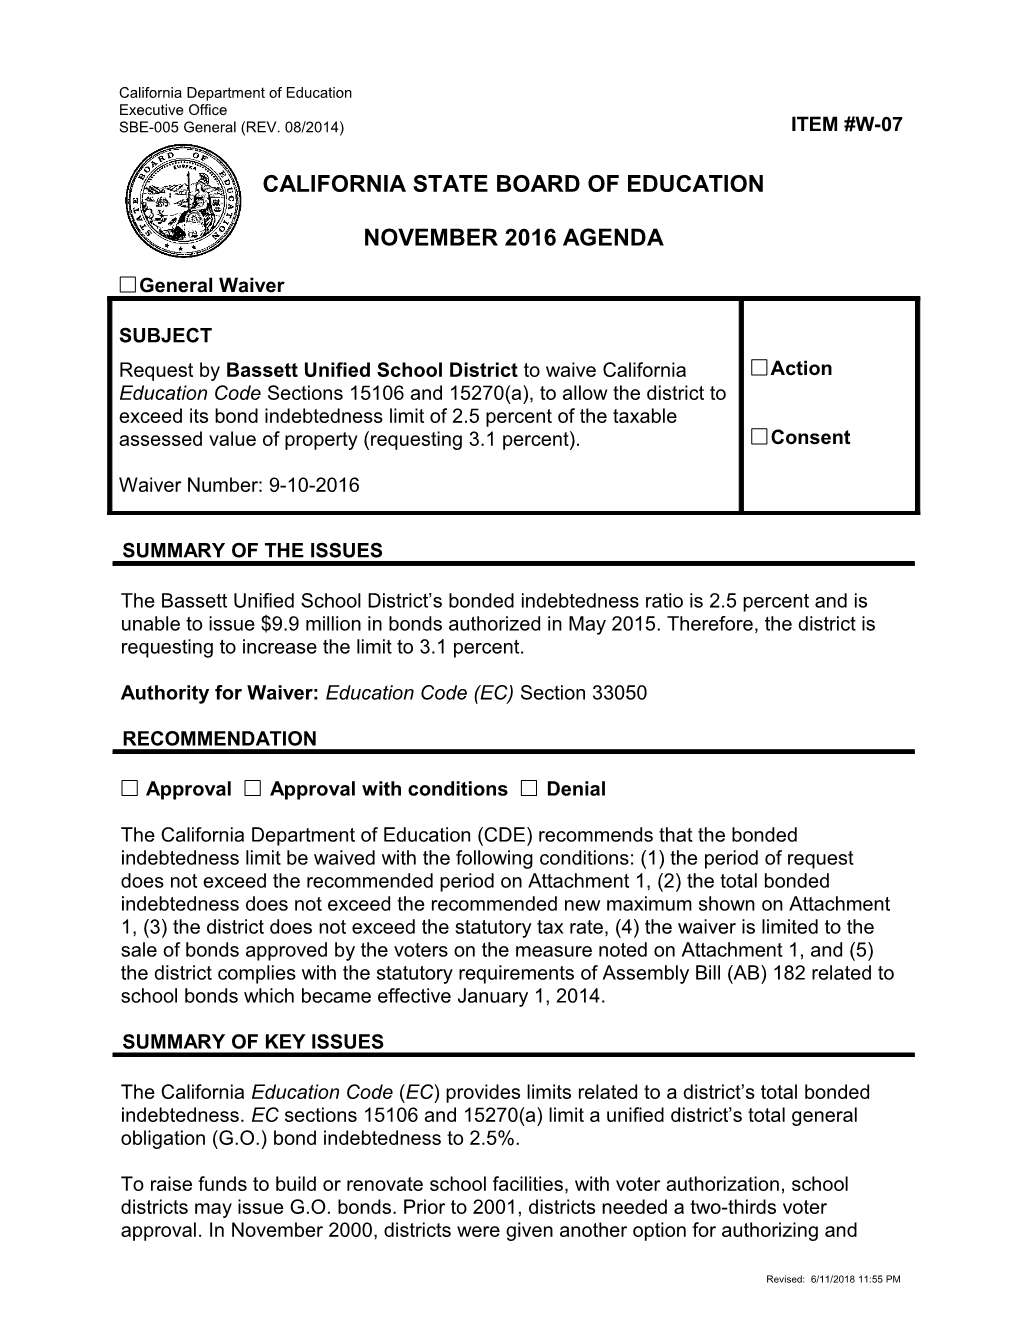 January 2017 Waiver Item W-07 - Meeting Agendas (CA State Board of Education)